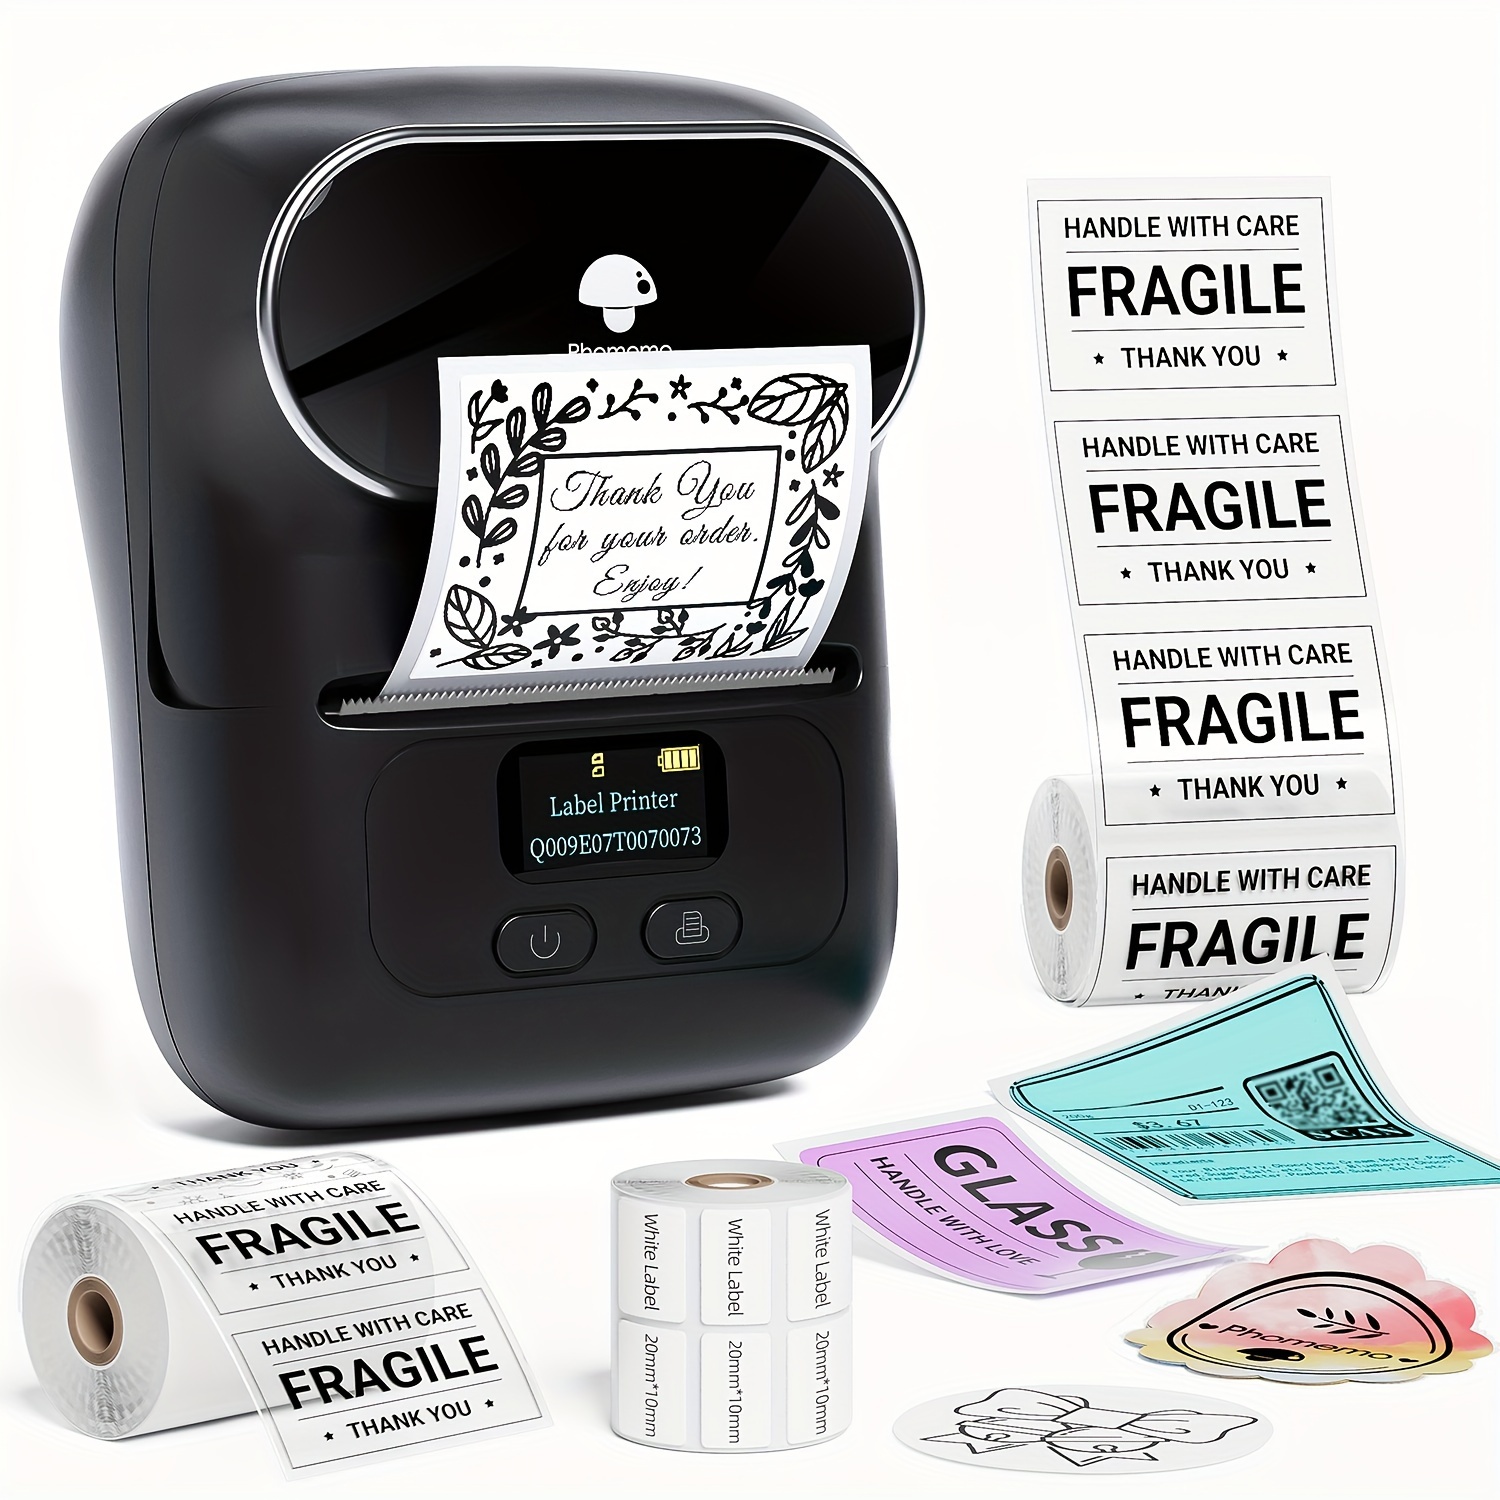 Phomemo M110 Self-adhesive Smart Thermal Label Printer for Business,Barcode  Label, Price Tag, Address Wireless